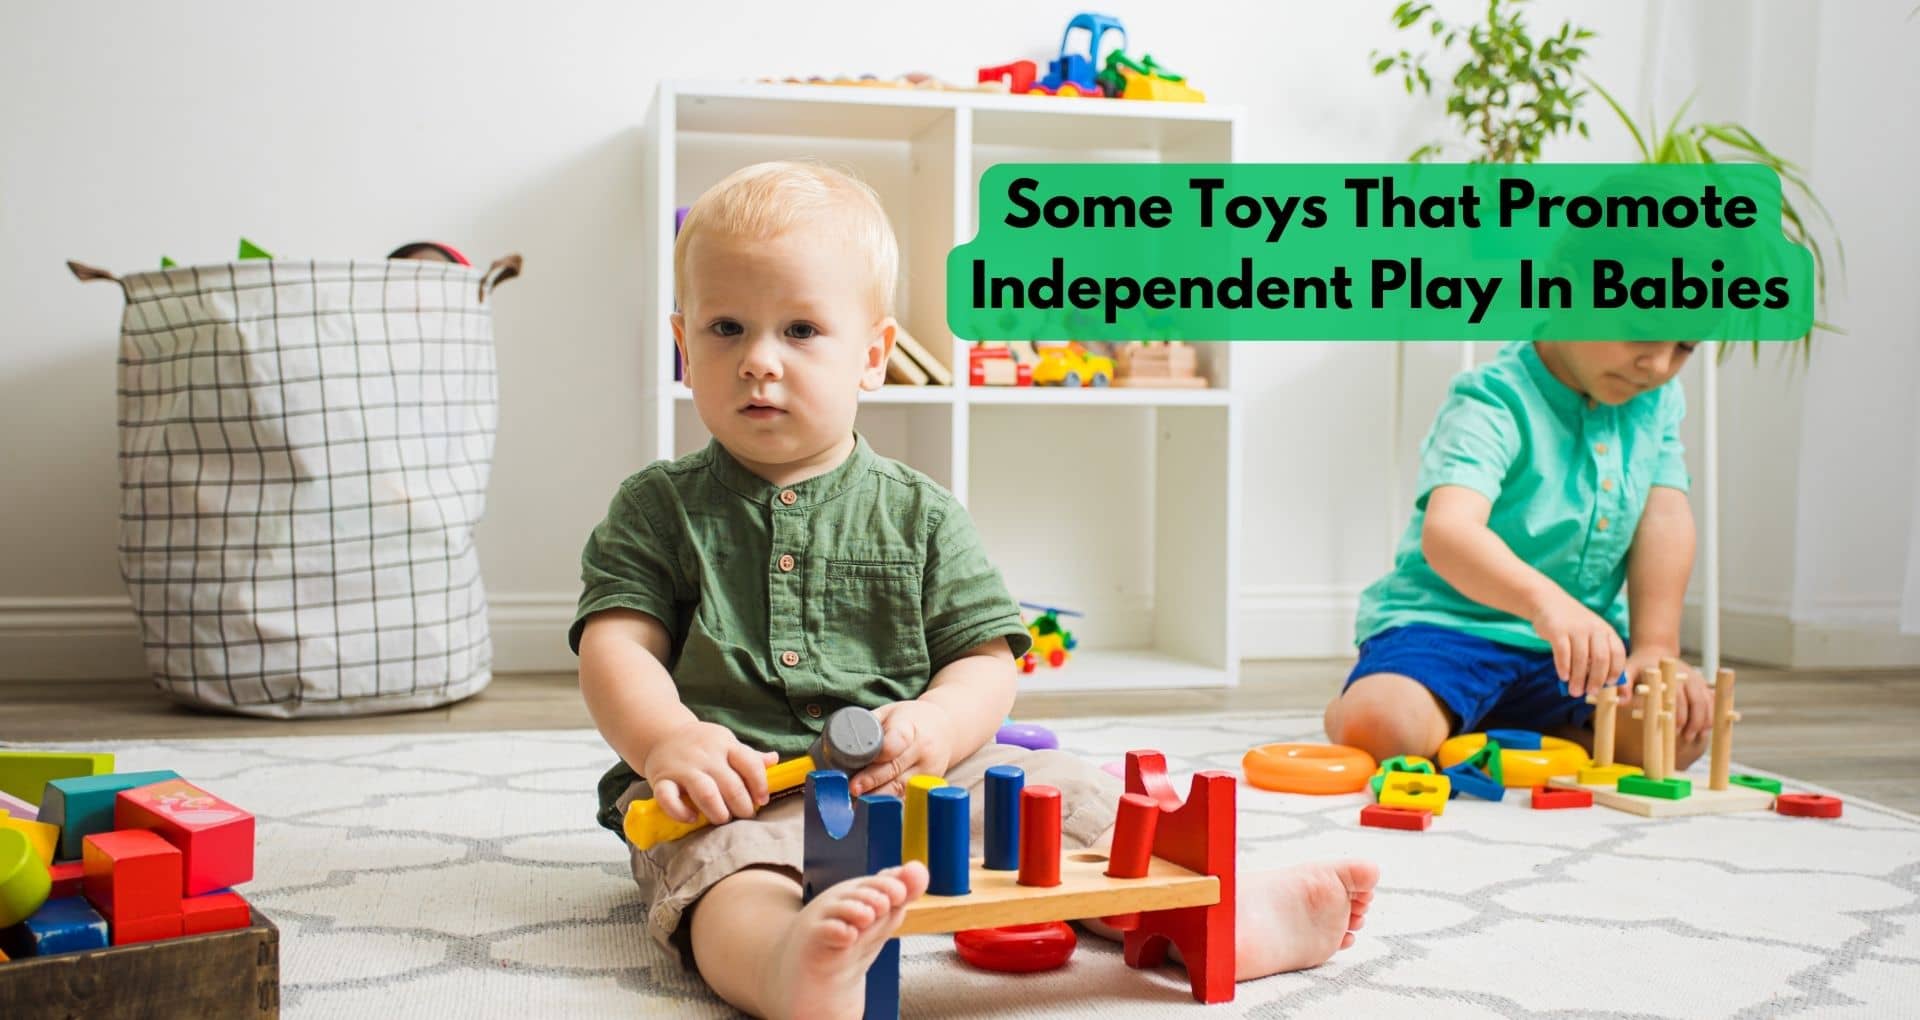 What Are Some Toys That Promote Independent Play In Babies?